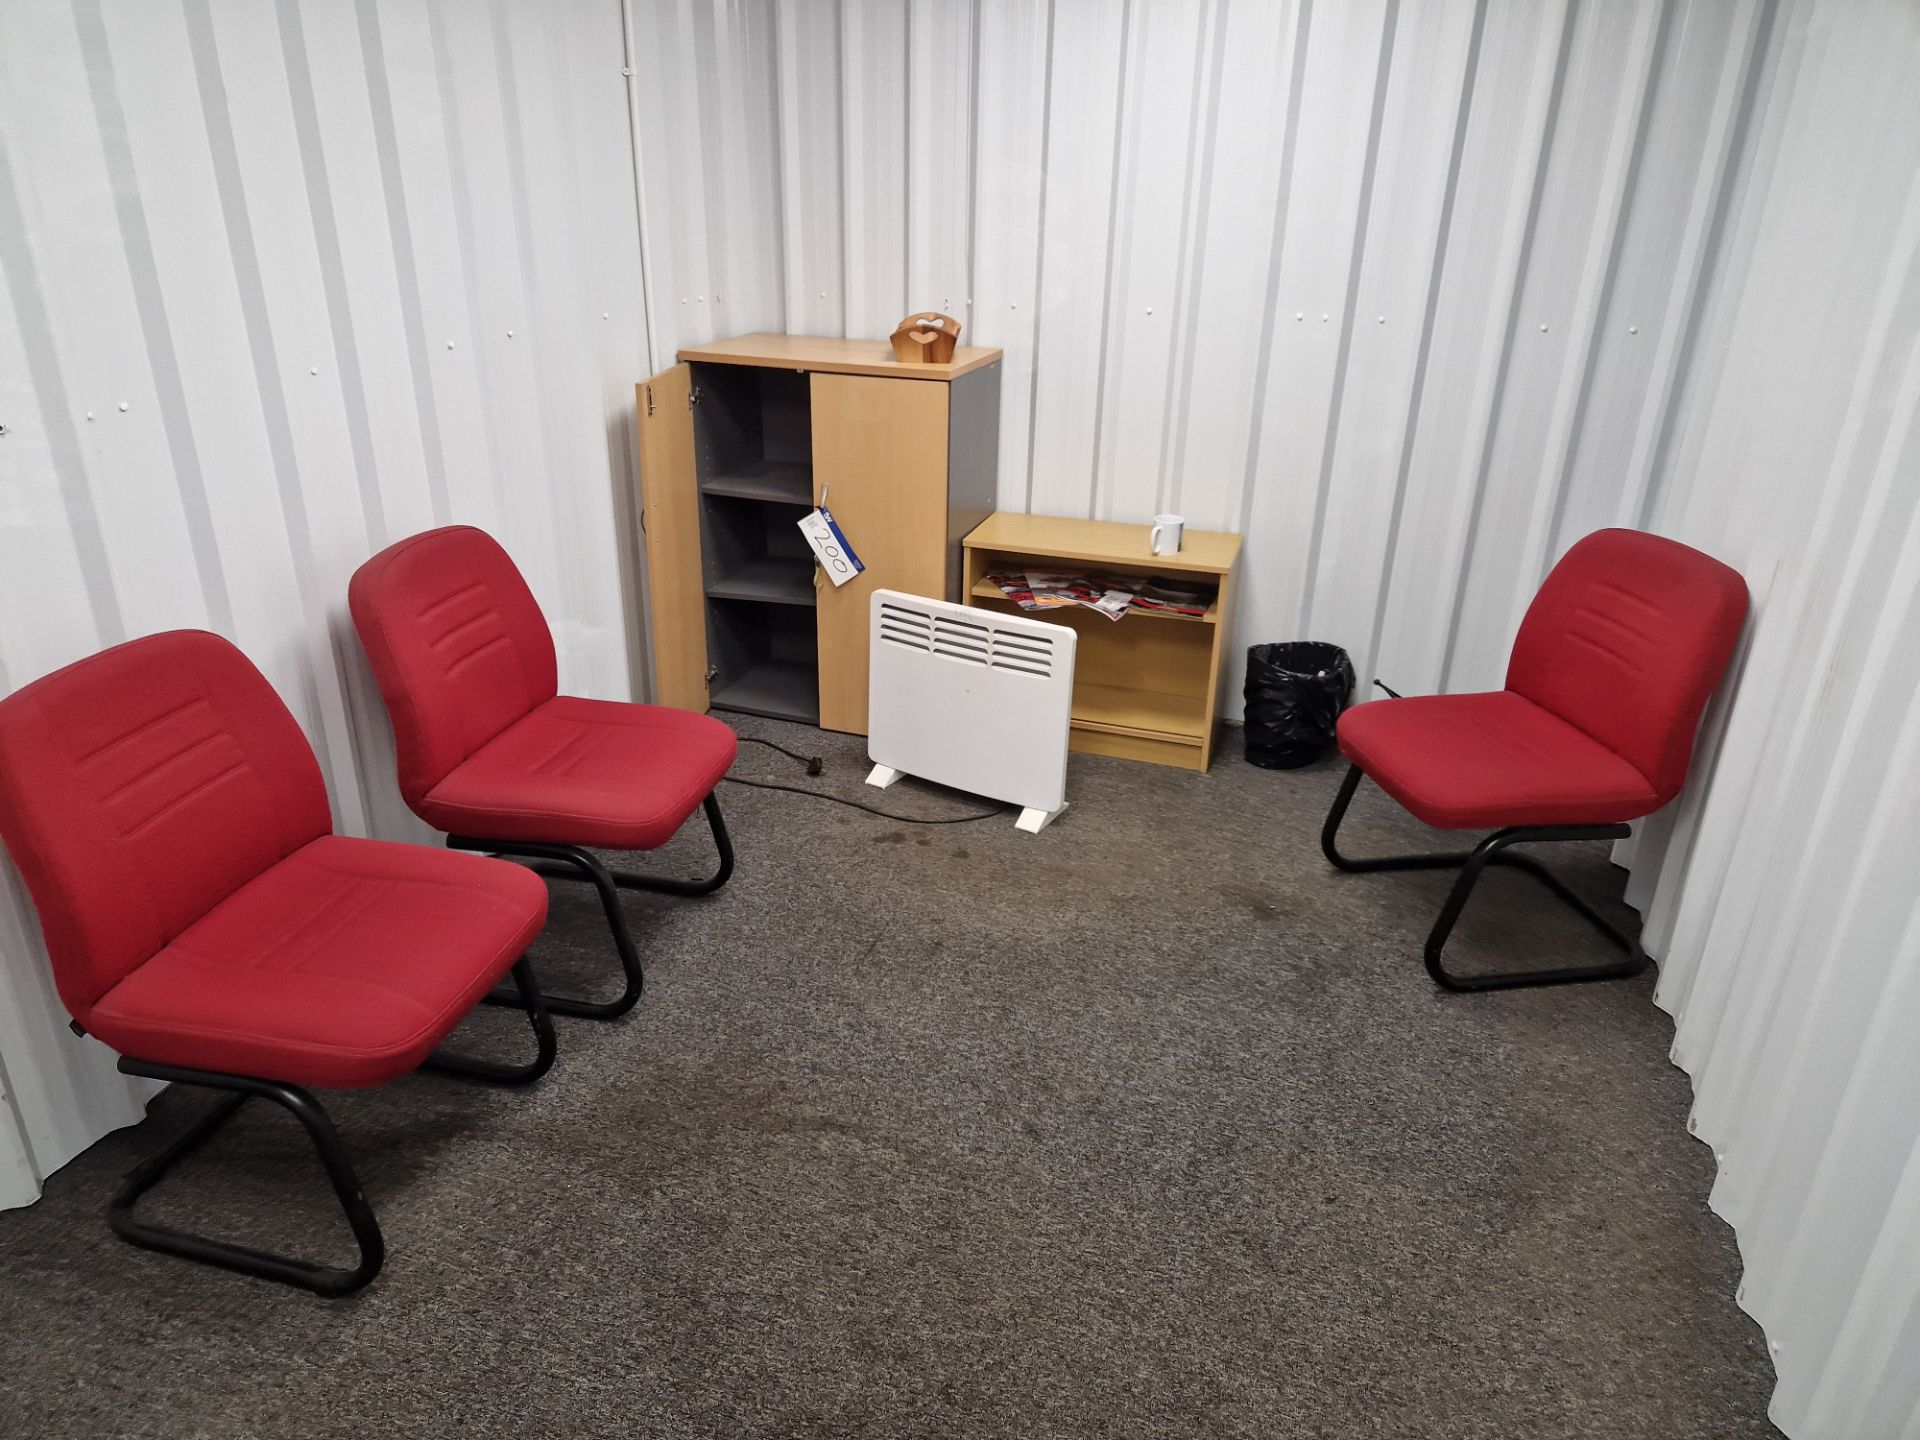 Four Office Chairs, Light Oak Veneered Side Cabinet, Shelving Unit and Heater Please read the